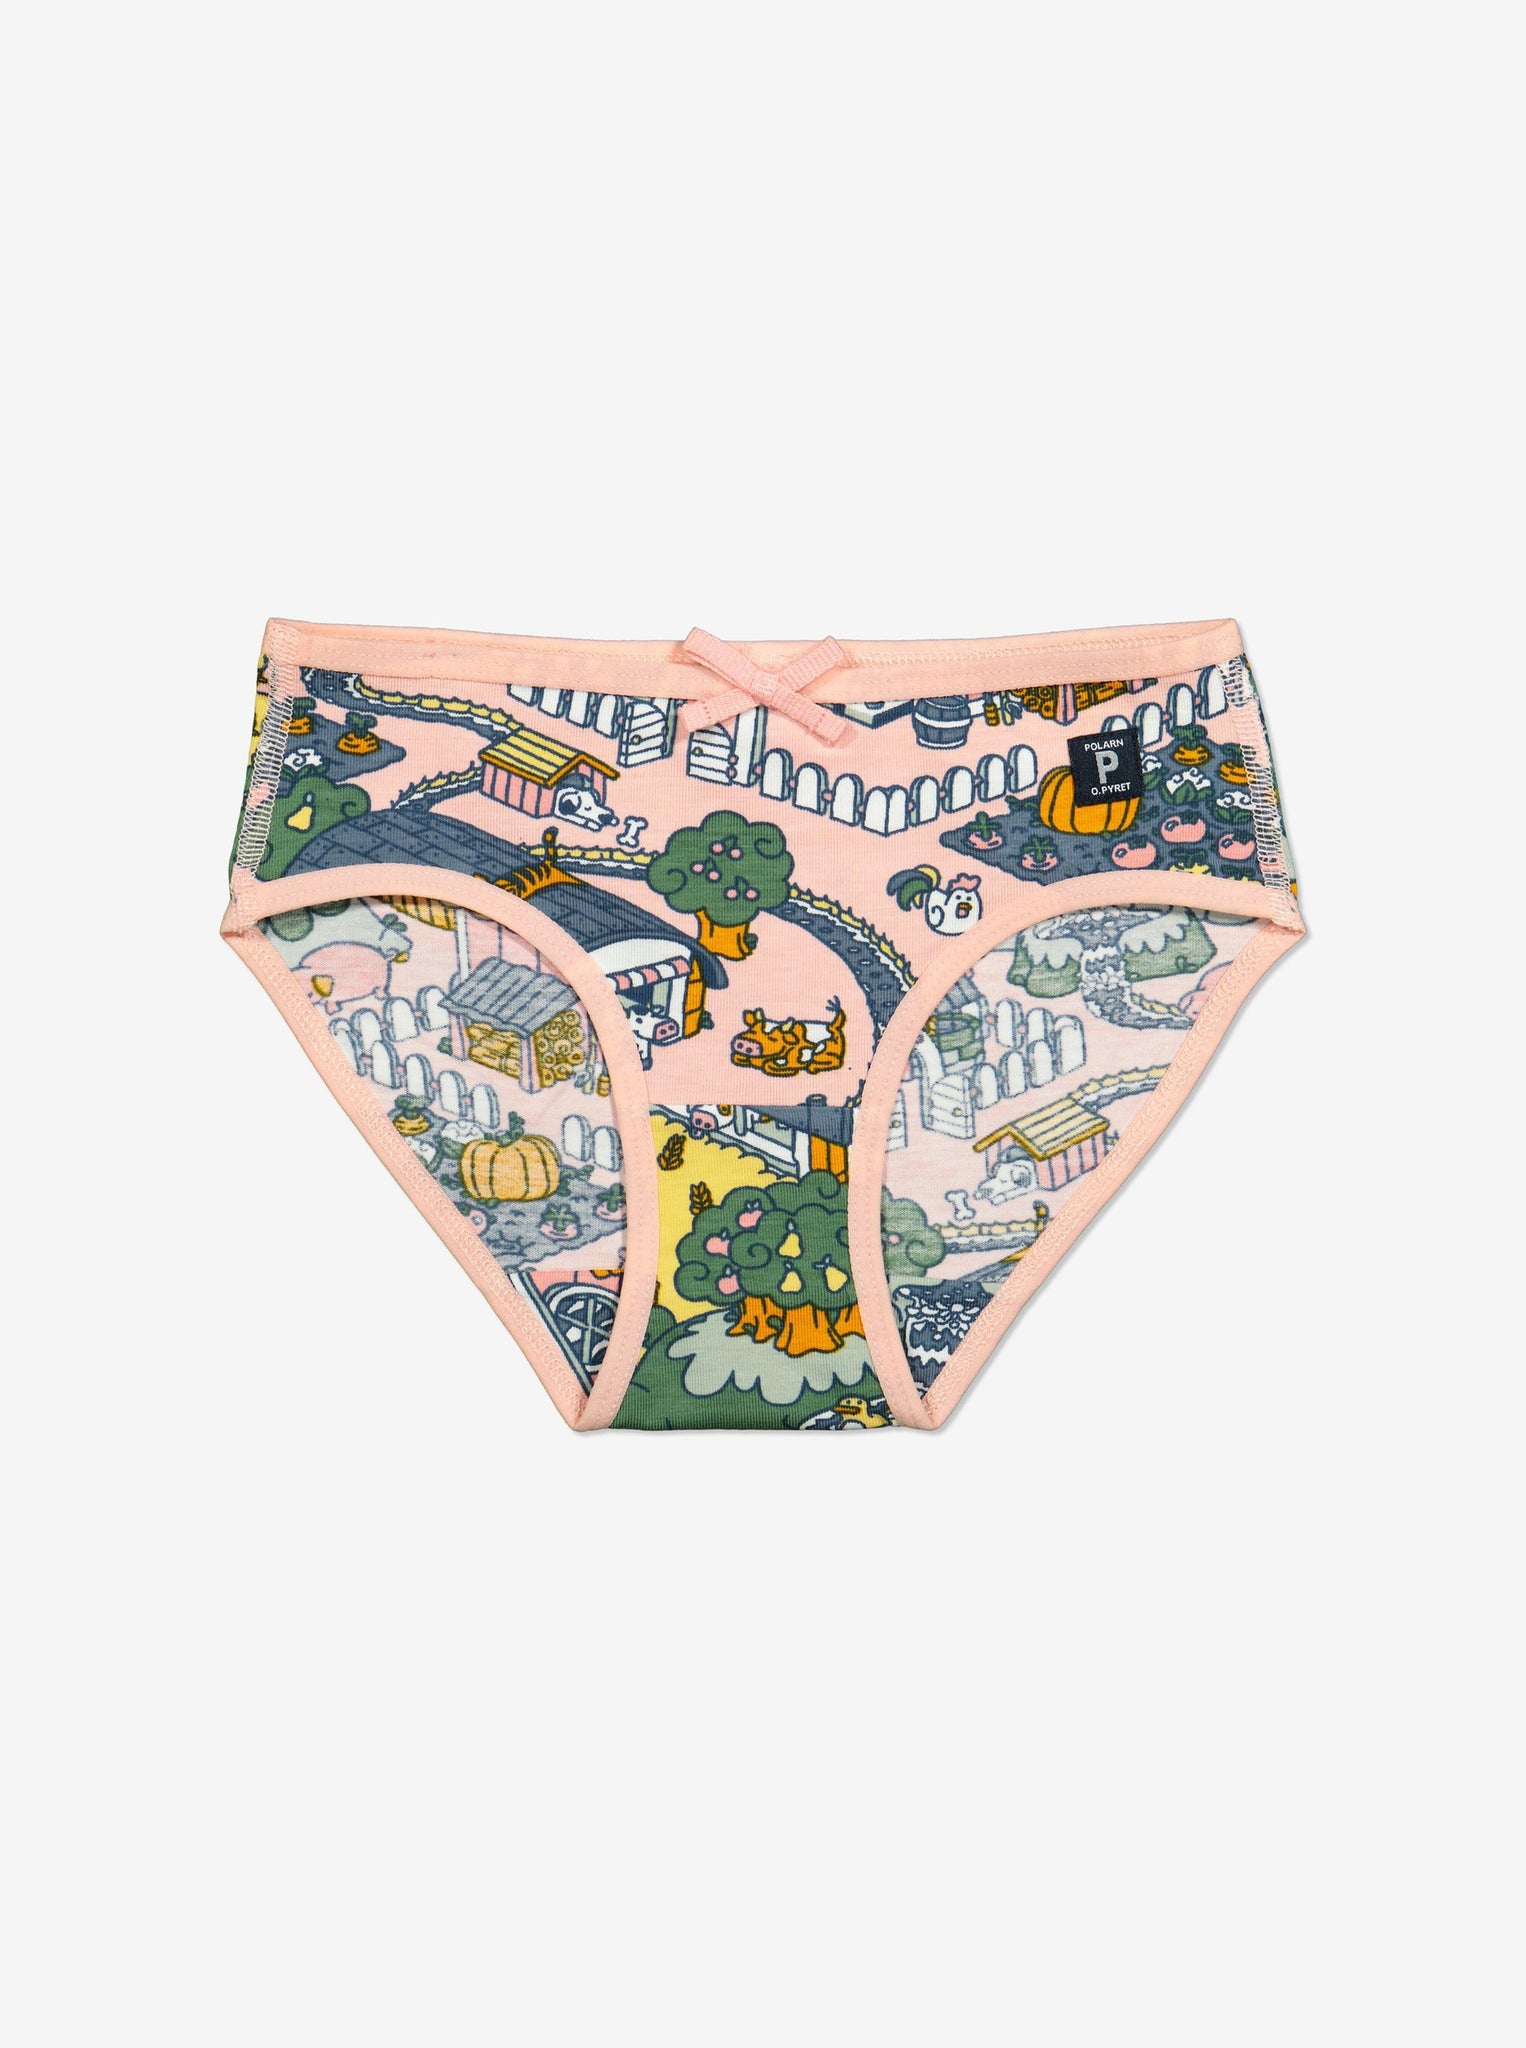  Organic Cotton Pink Girls Briefs from Polarn O. Pyret Kidswear. Made from sustainable materials.